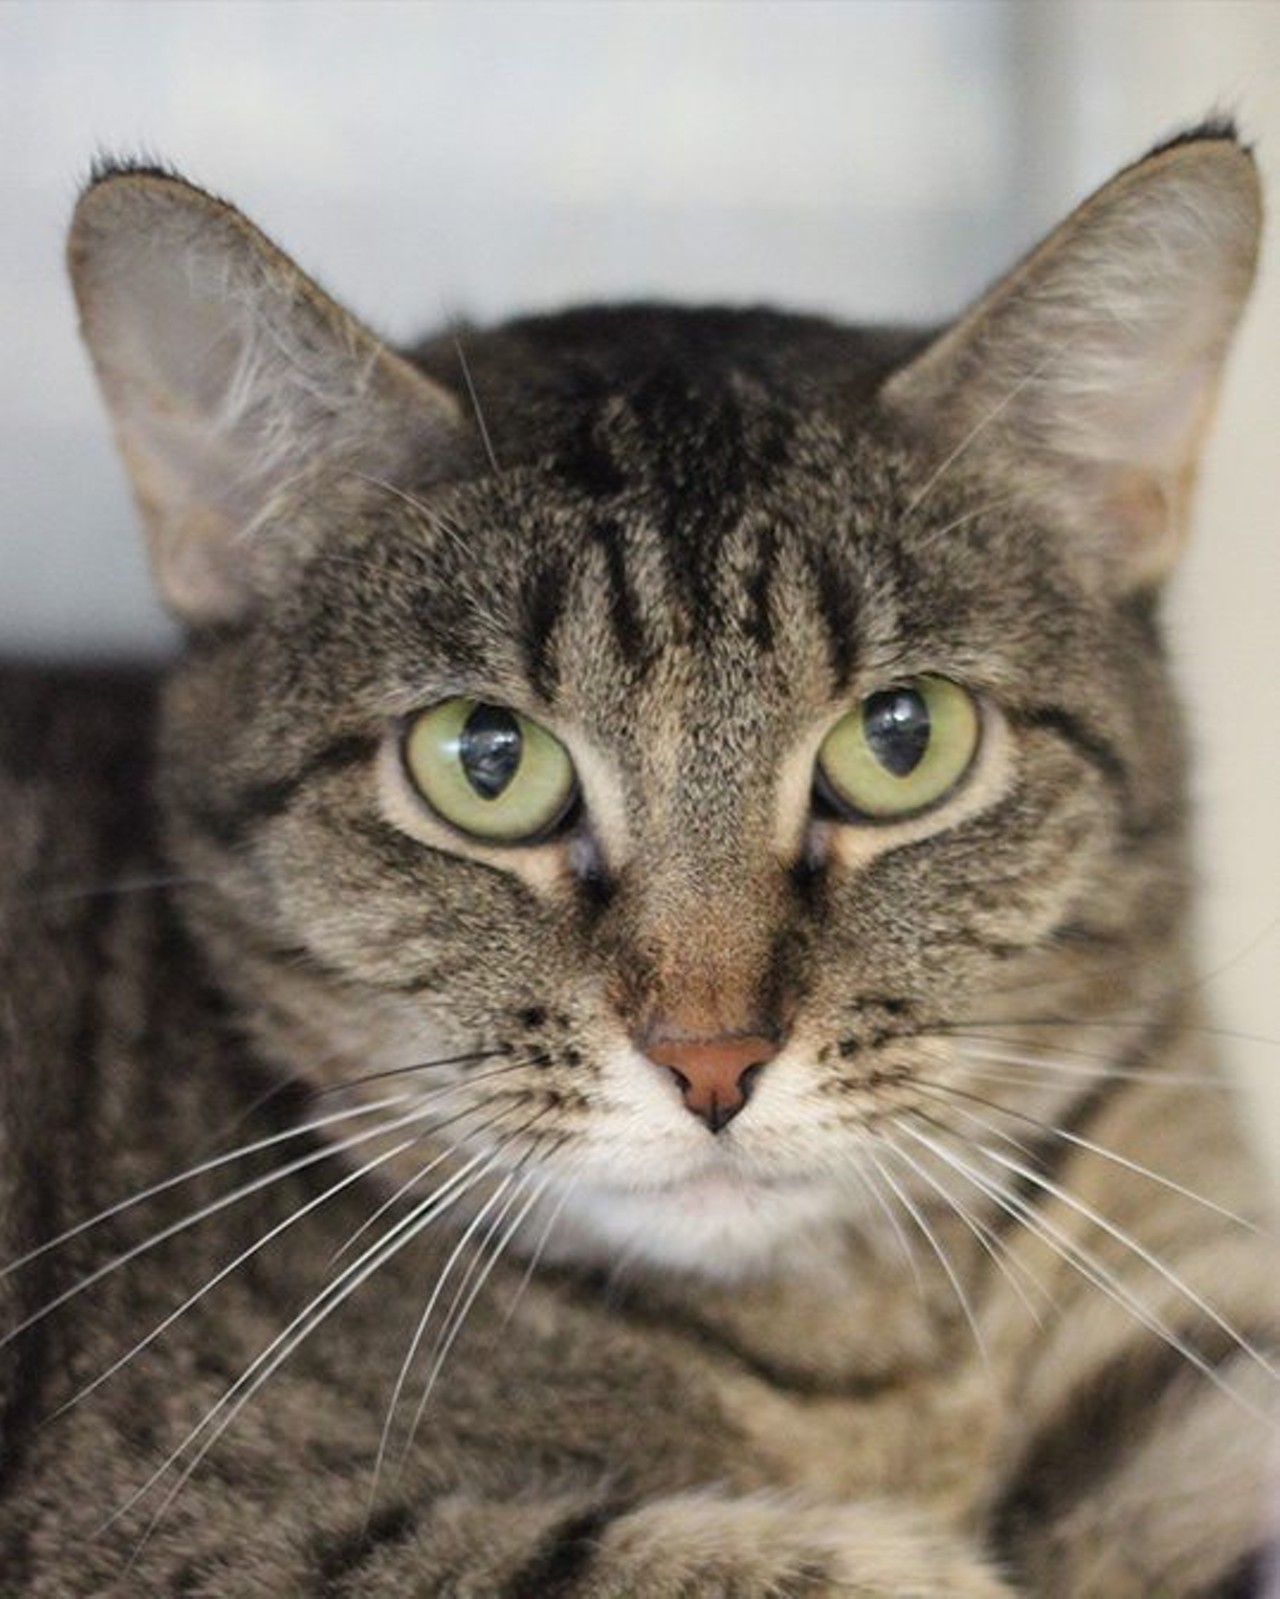 Nikki"I&#146;m a relaxed and fairly calm tabby cat. Actually, I&#146;m a bit lazy and can be found cat napping and quietly lounging around. I&#146;m a friendly girl and enjoy being pet. Come by and visit me!"